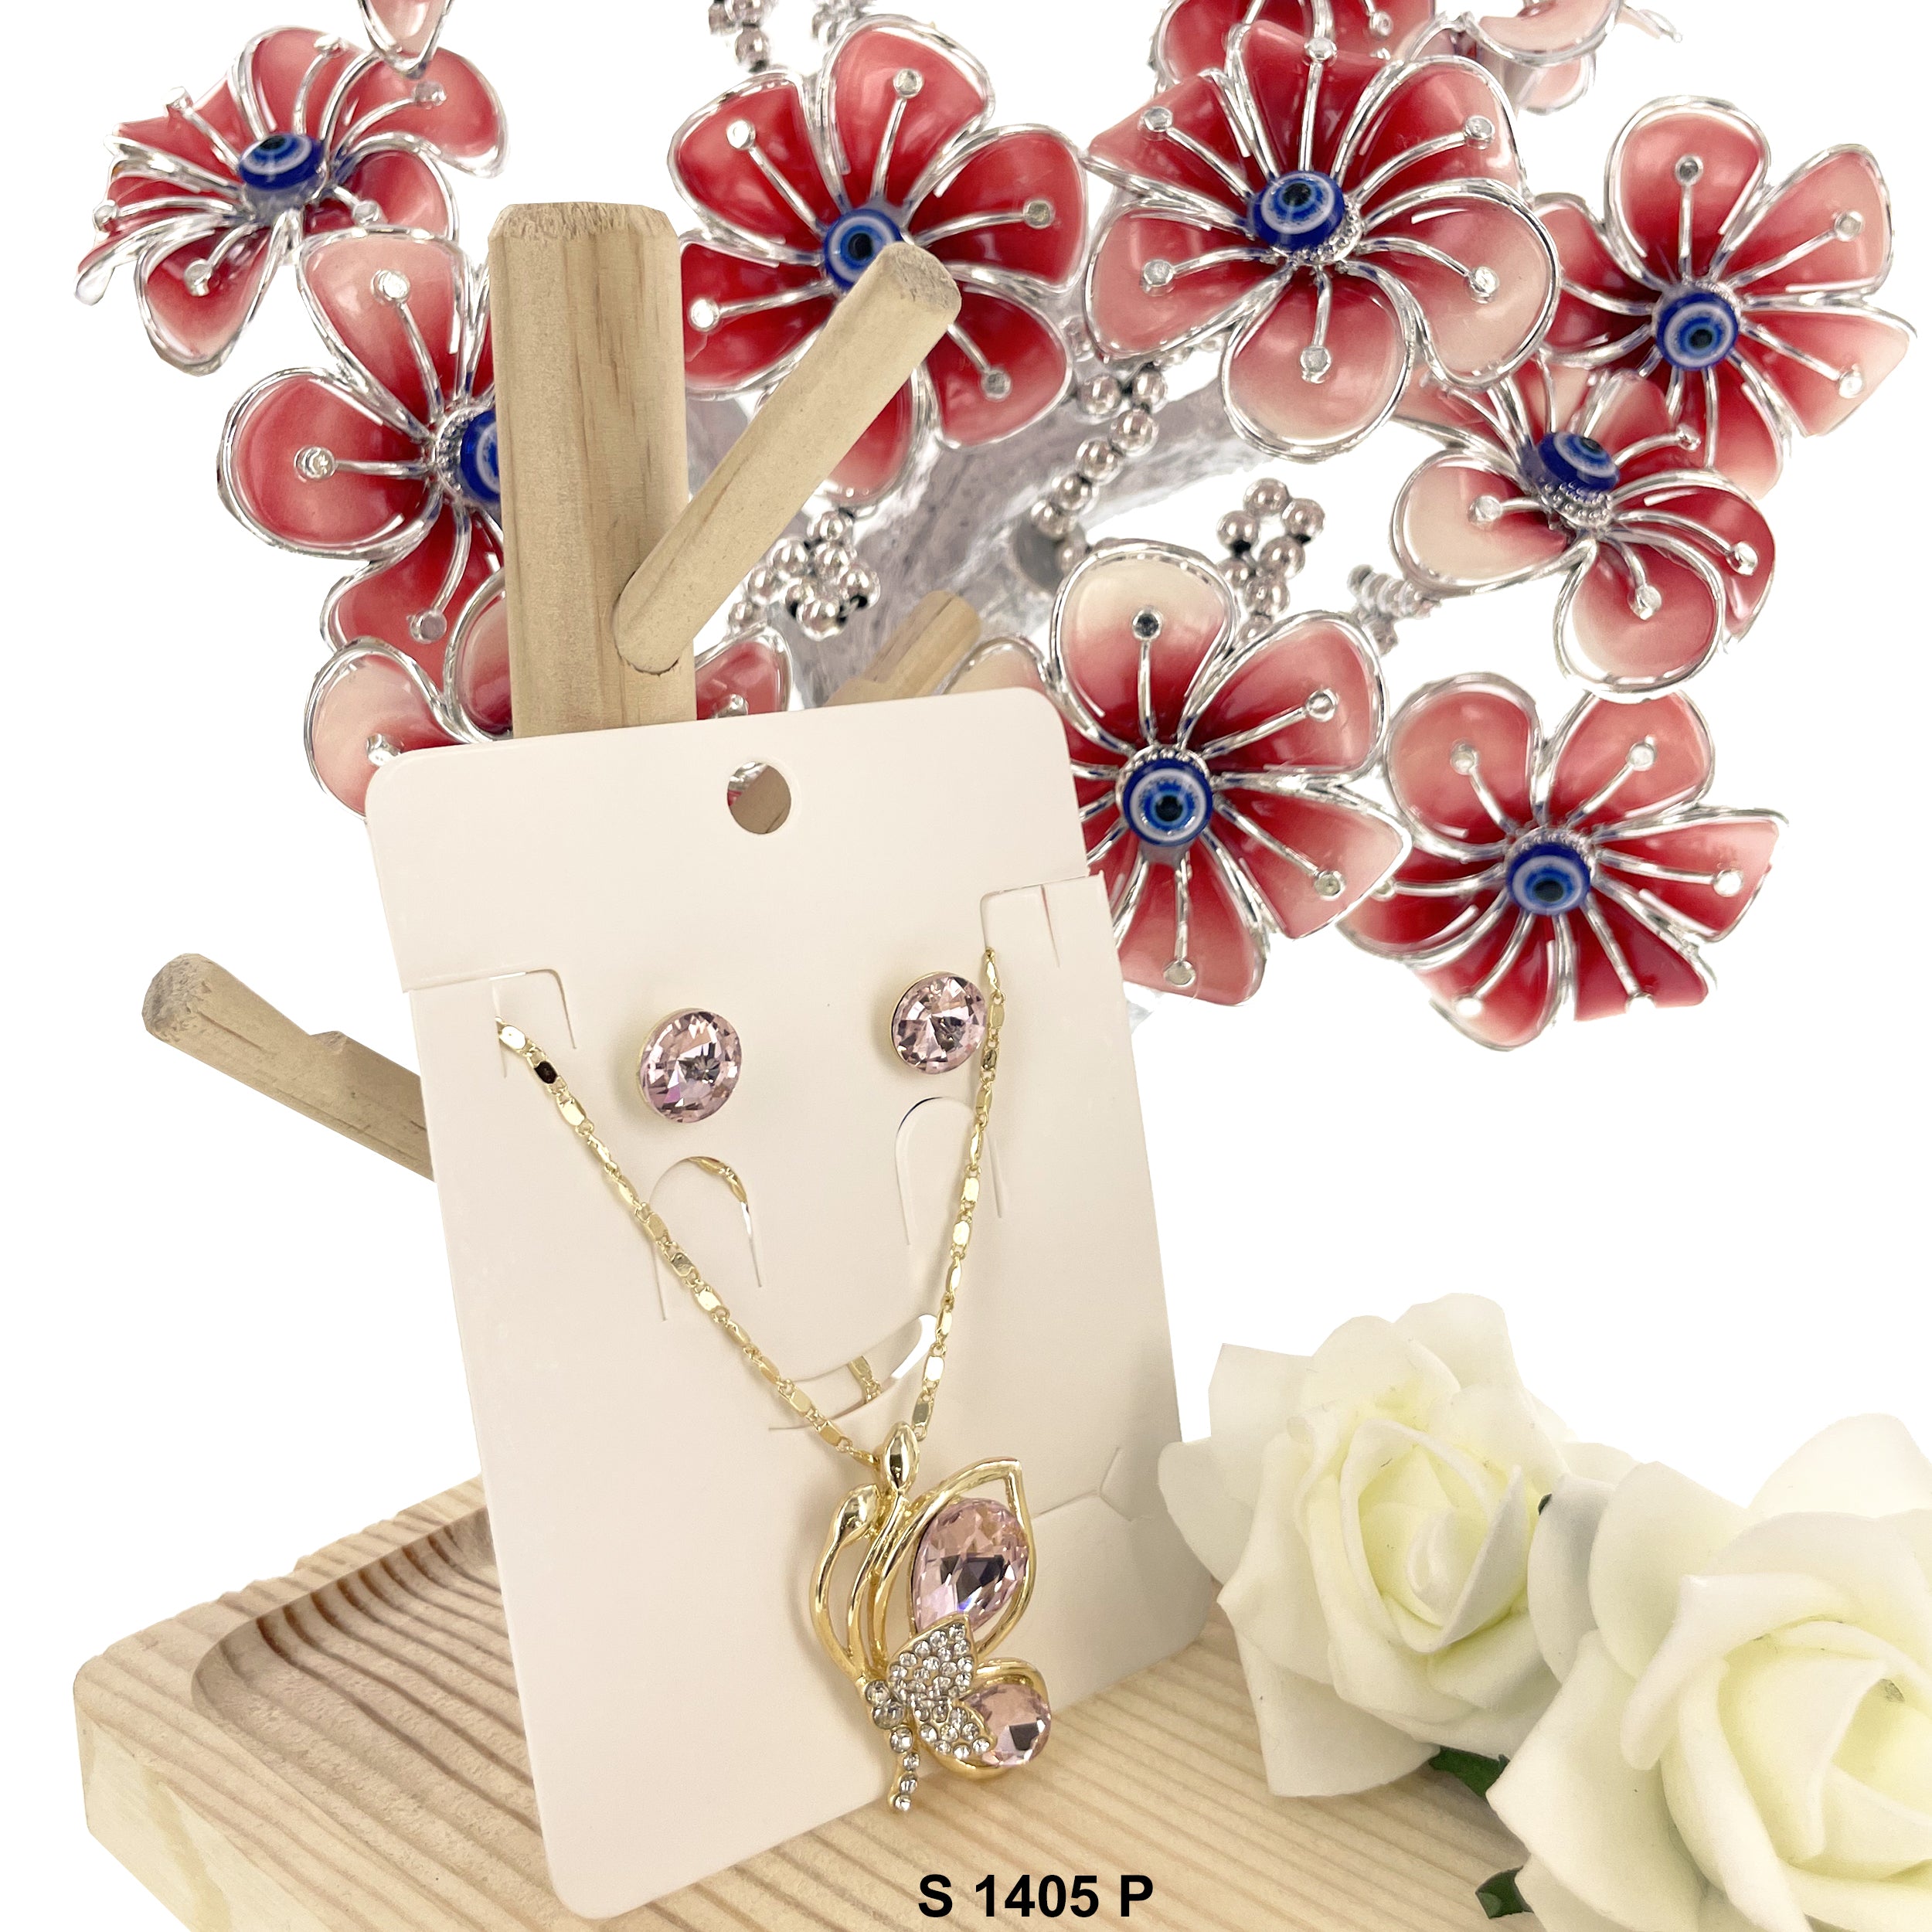 Butterfly Stoned Pendant Necklace Set S 1405 P